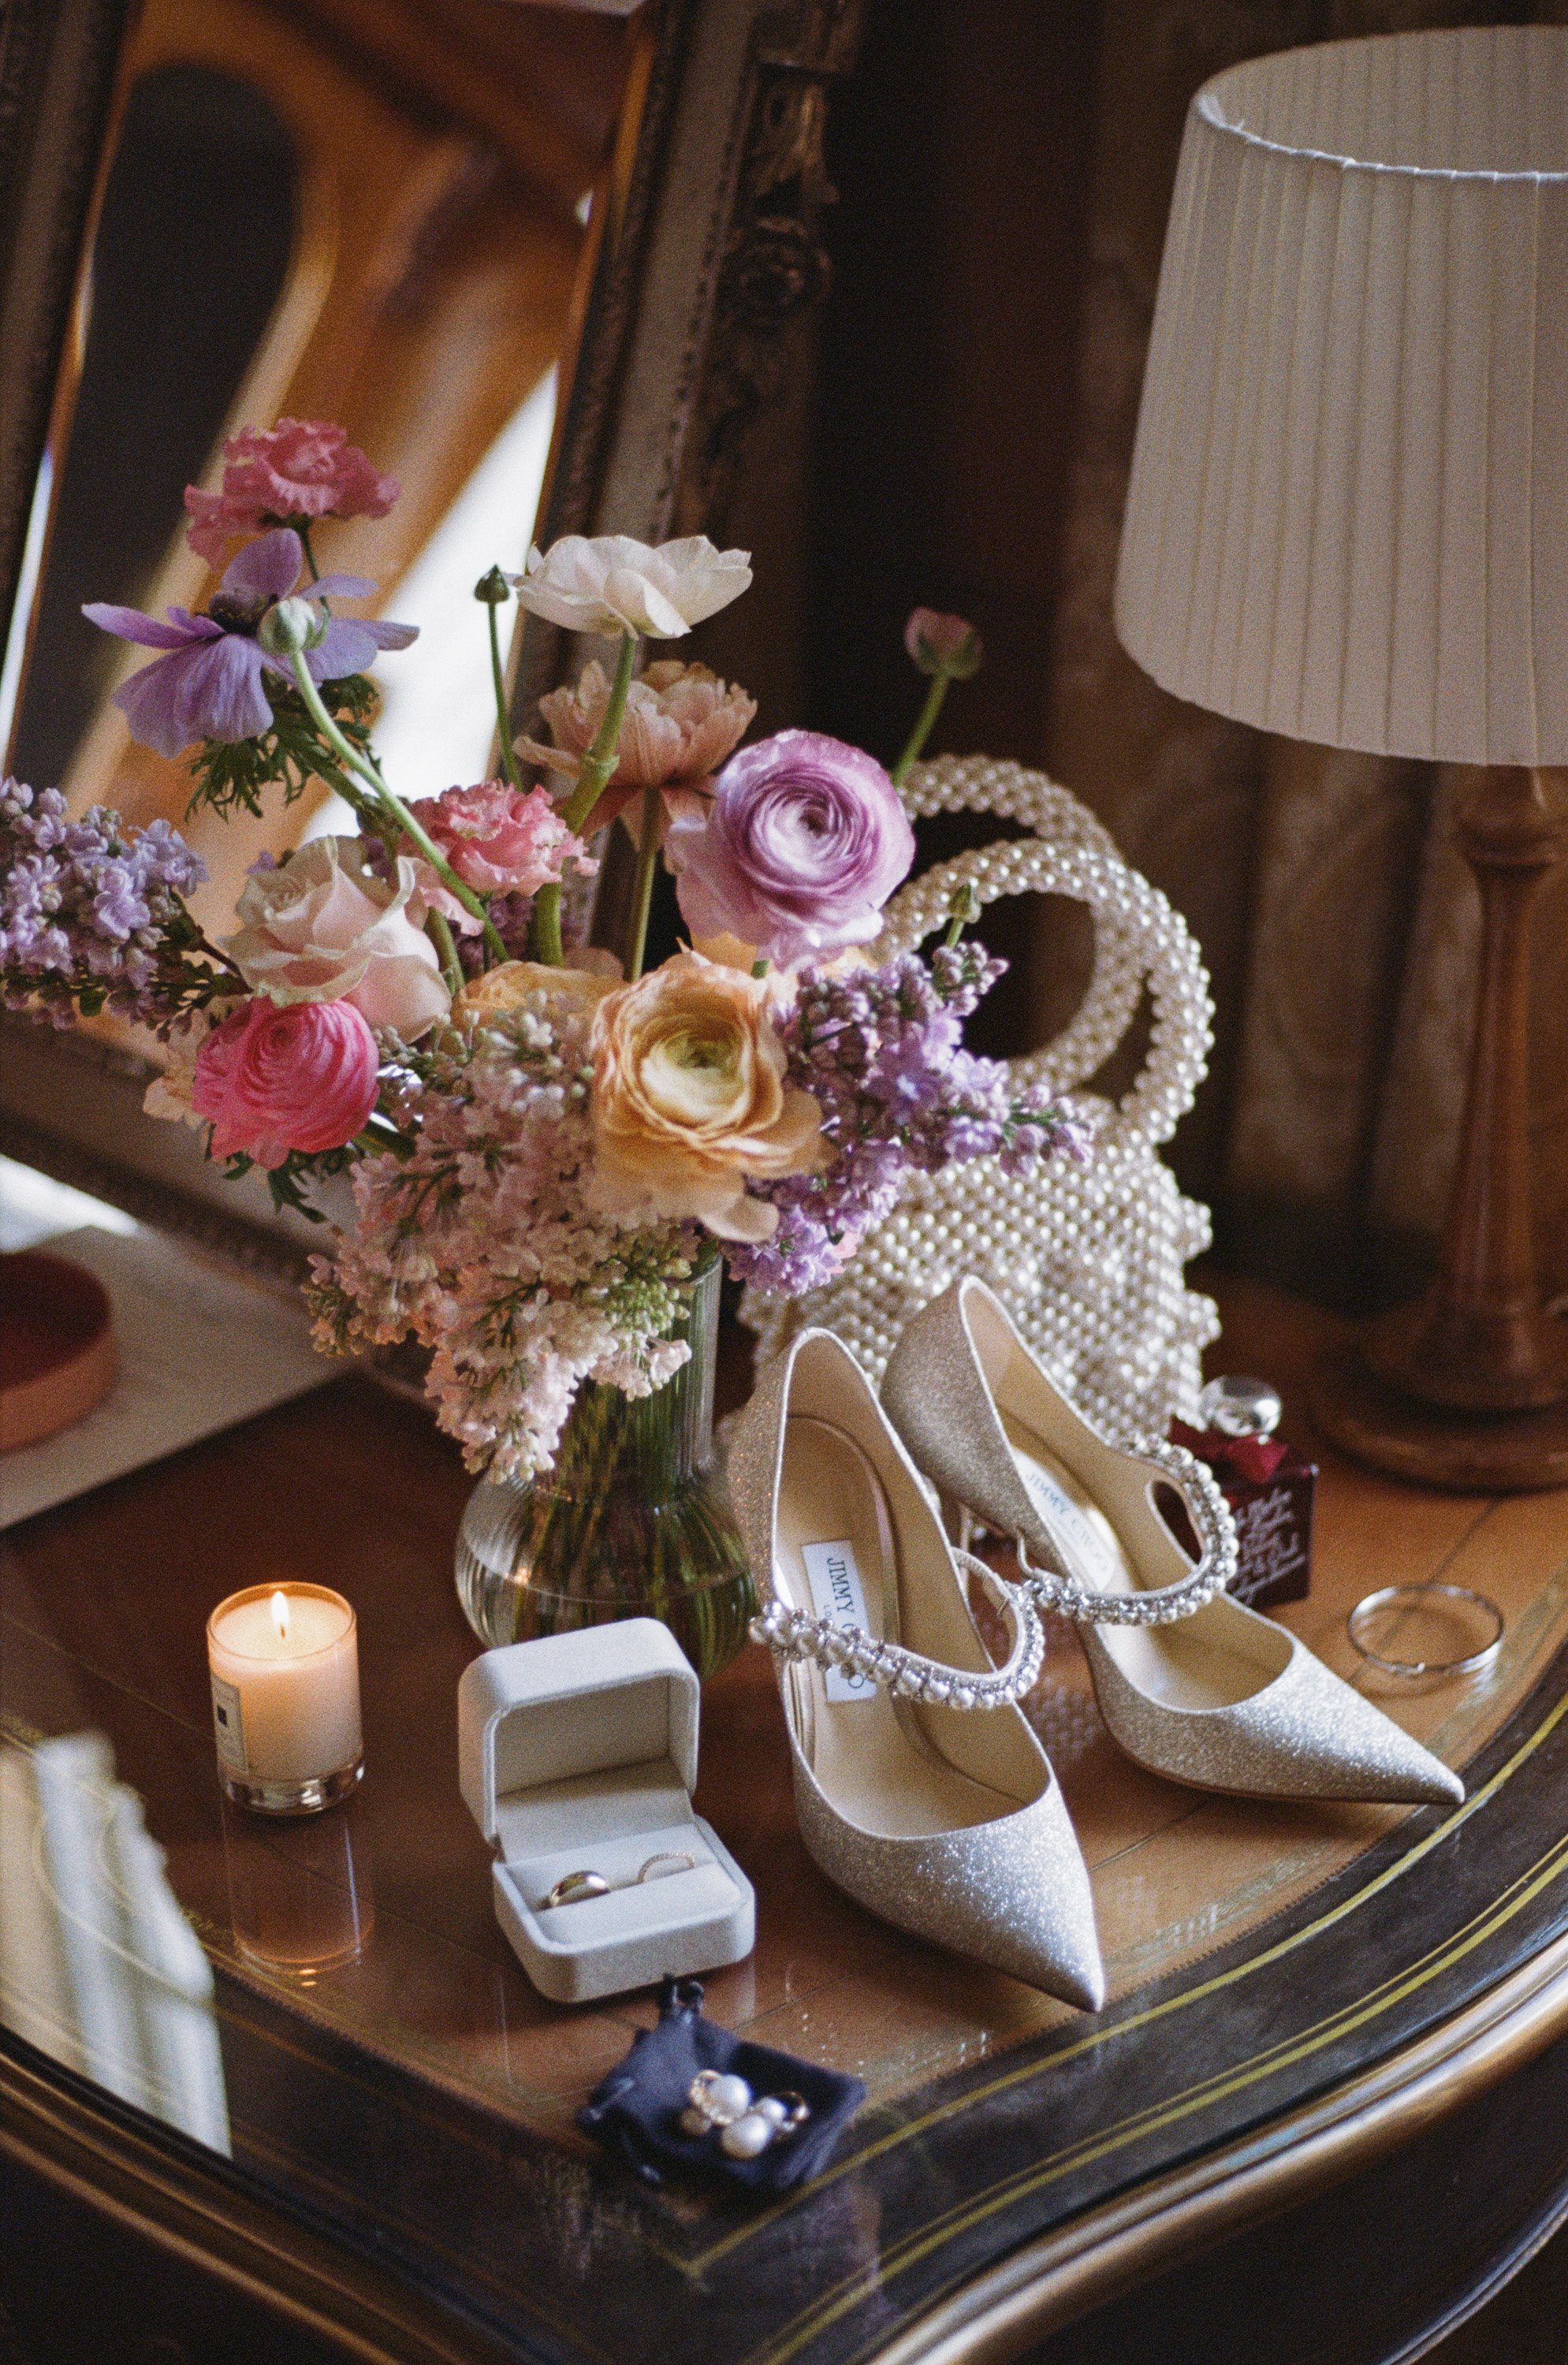 Pearl bridal accessories including jimmy choo pearl wedding shoes, pearl handbag from shrimps and pearl earrings on a dressing table with beautiful flowers and candle at luxury wedding venue elmore court